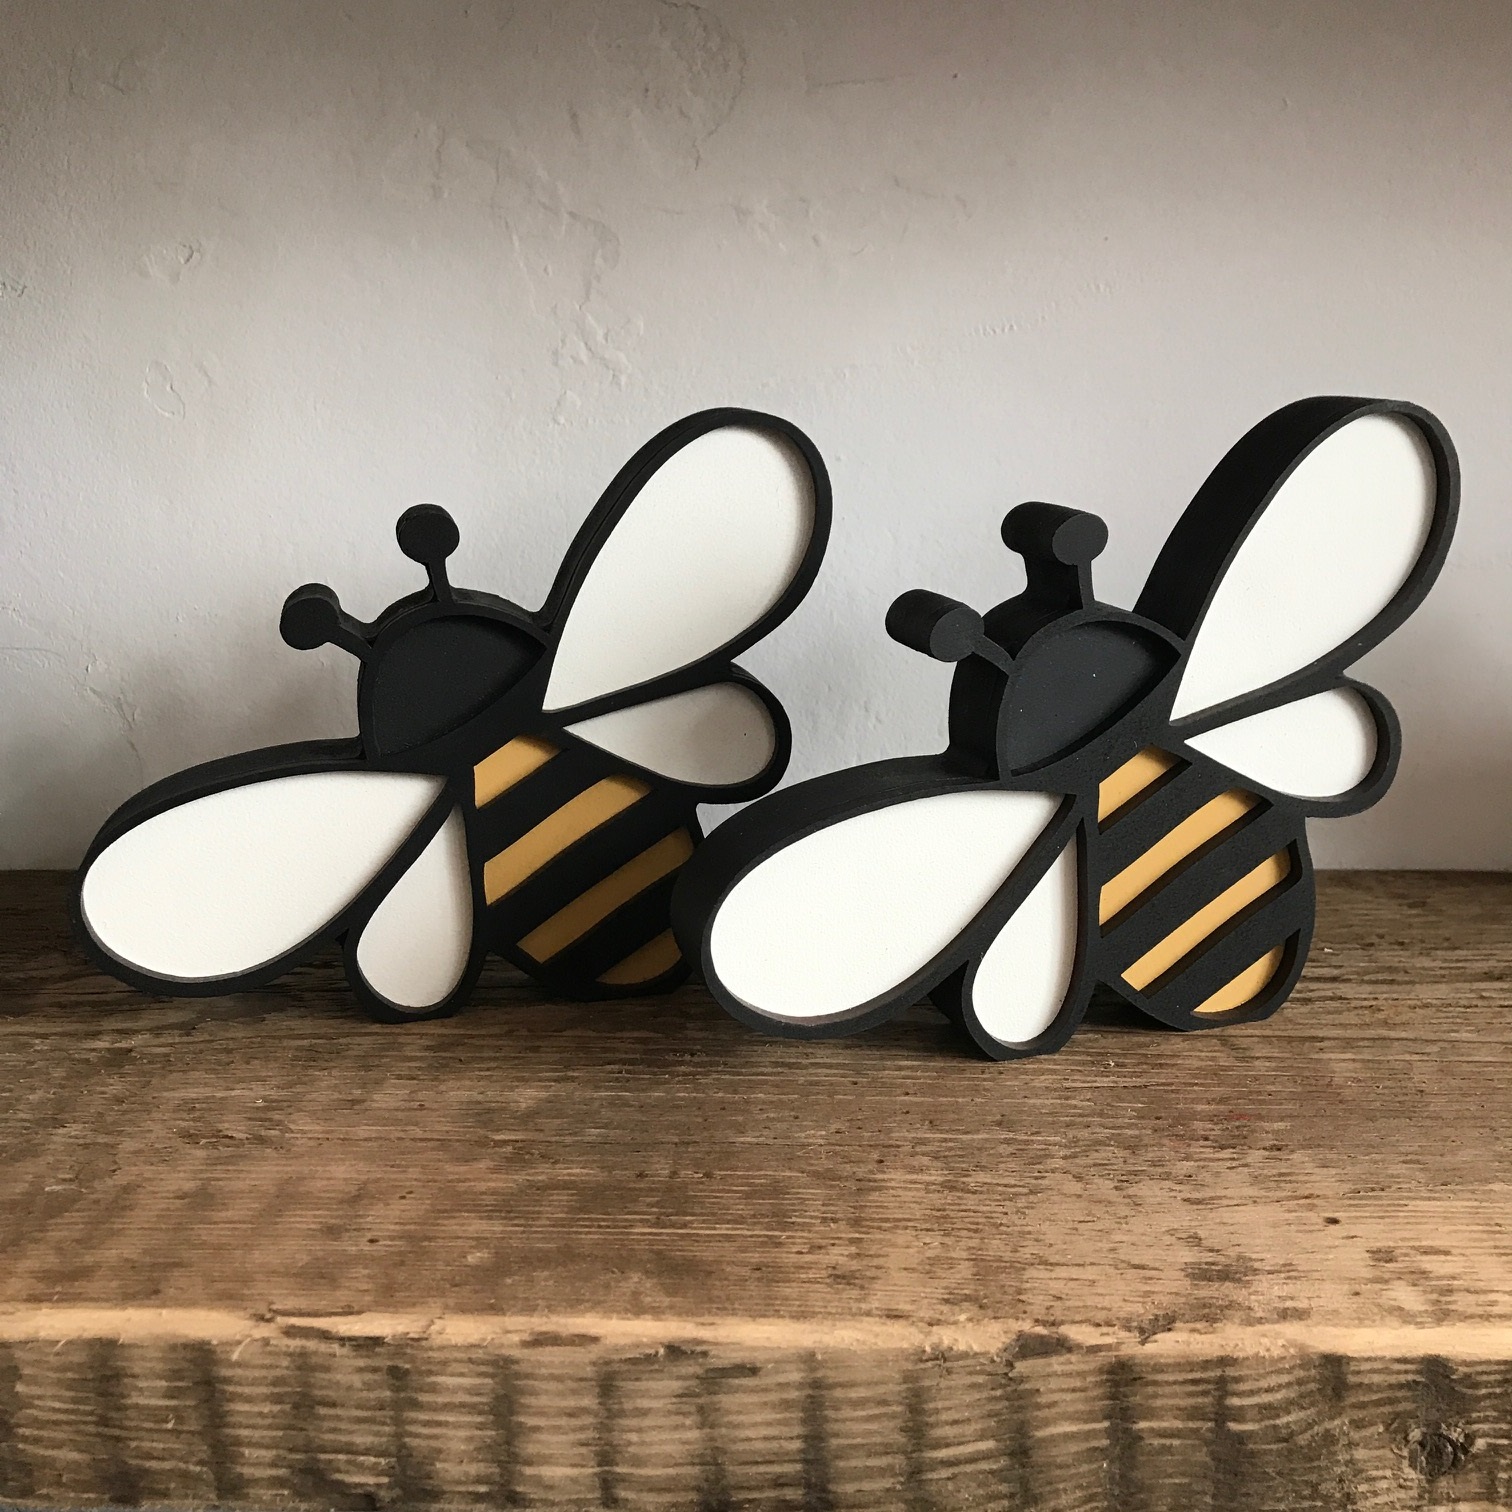 Wooden Bees